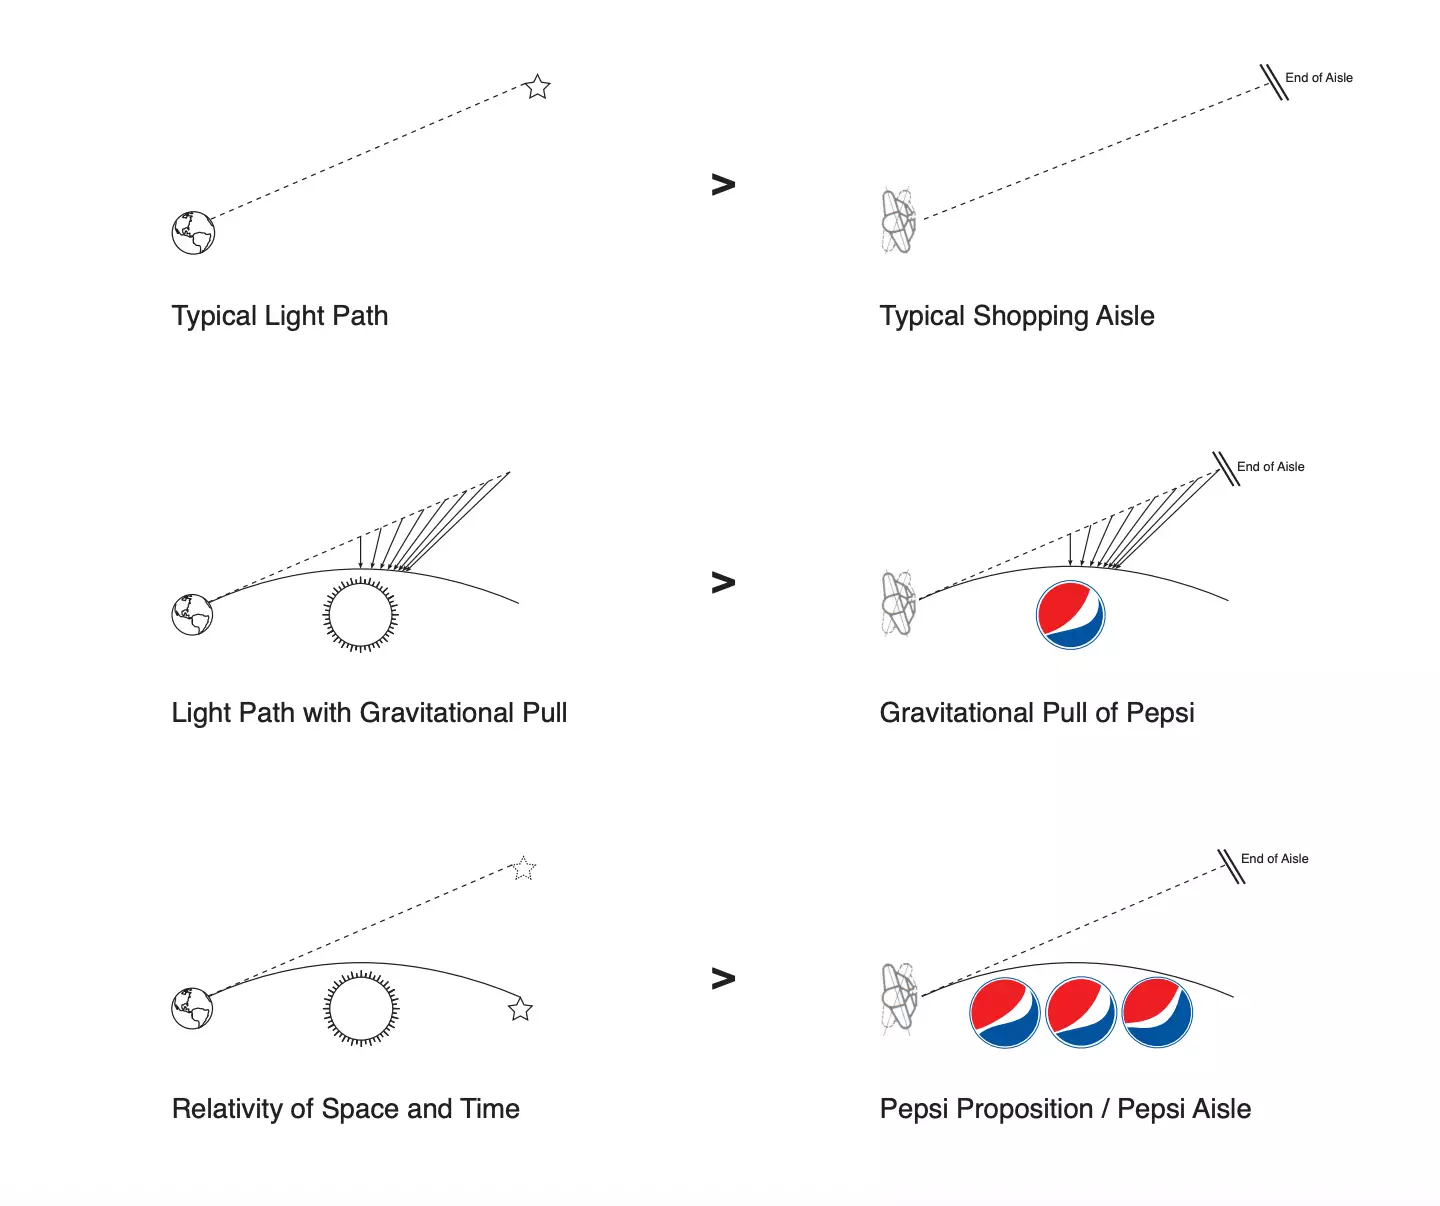 Pepsi's logo and the Theory of Relativity.